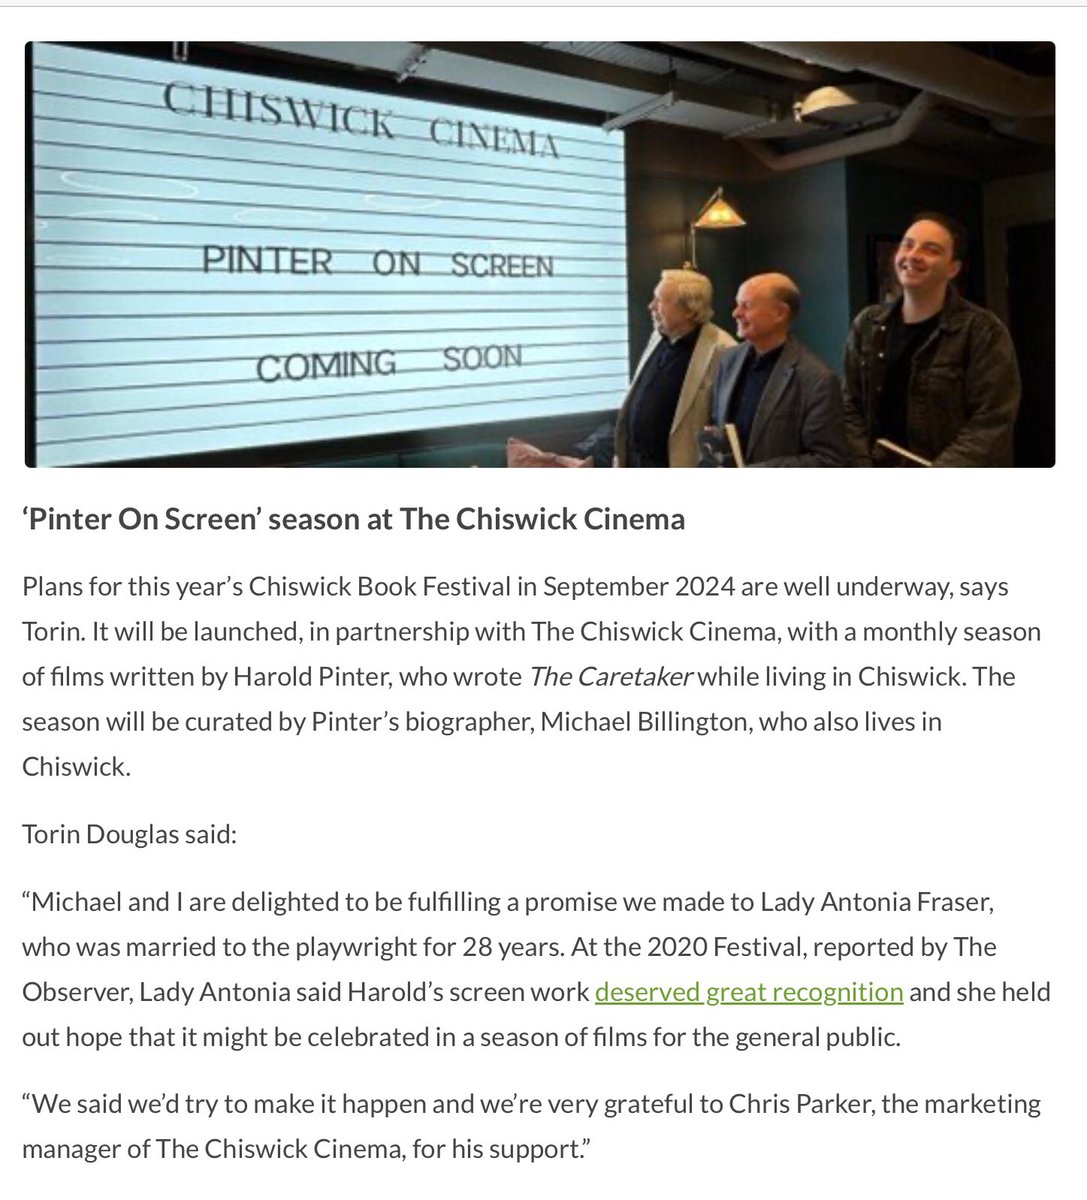 @W4BookFest also announces monthly ‘Pinter On Screen’ season @ChiswickCinema curated by Michael Billington @billicritic starting on April 27th. chiswickcalendar.co.uk/chiswick-book-… #Chiswick #Pinter #films @masksignal @TorinDouglas